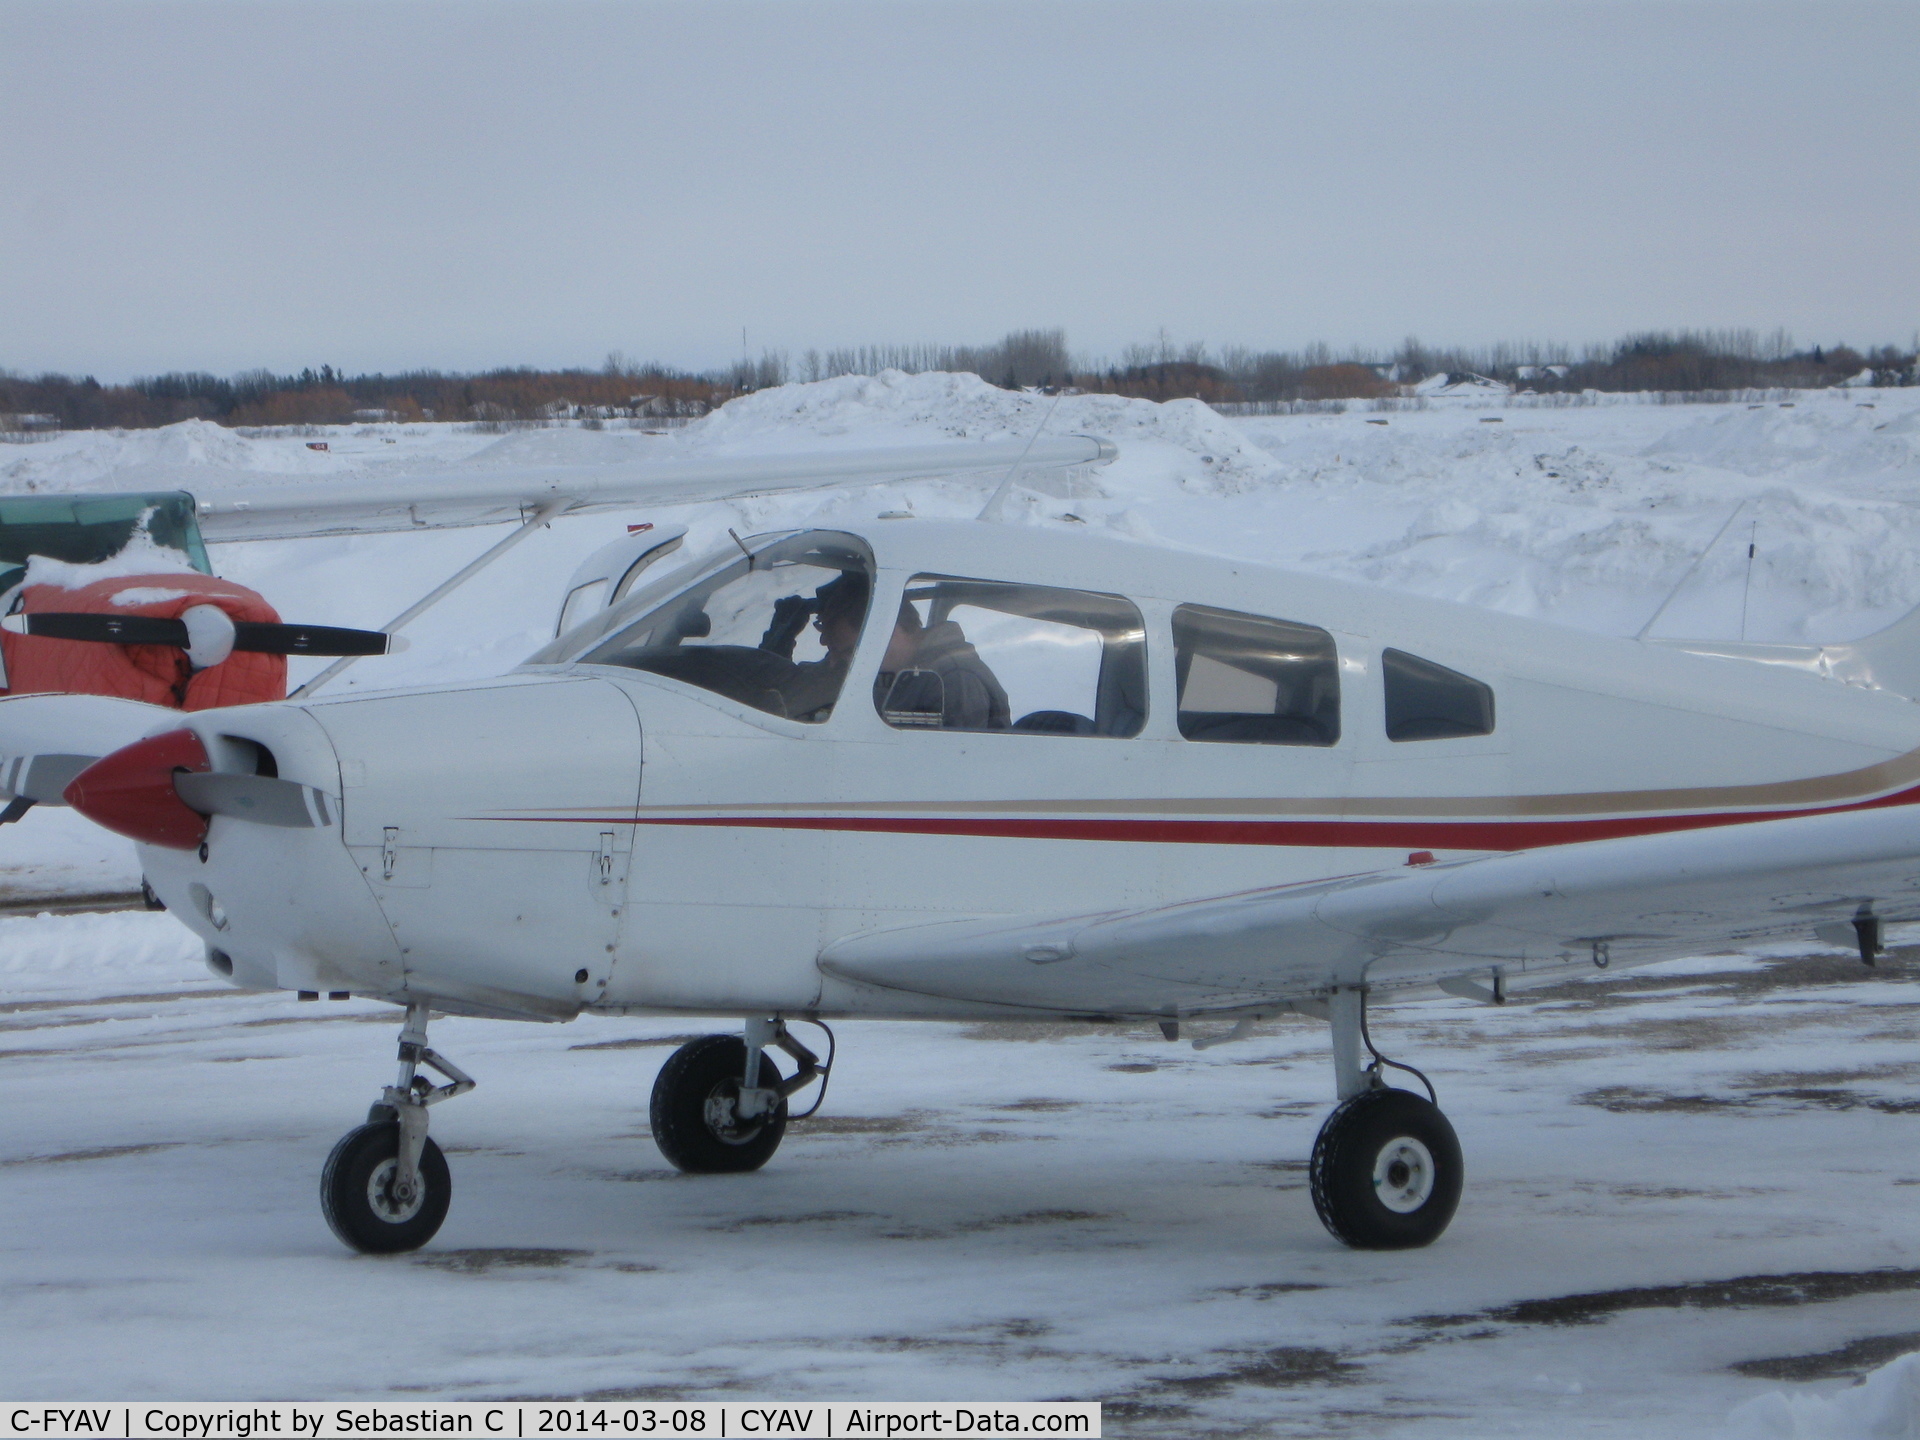 C-FYAV, 1977 Piper PA-28-161 Warrior C/N 28-7816162, The plane I am learning to fly on